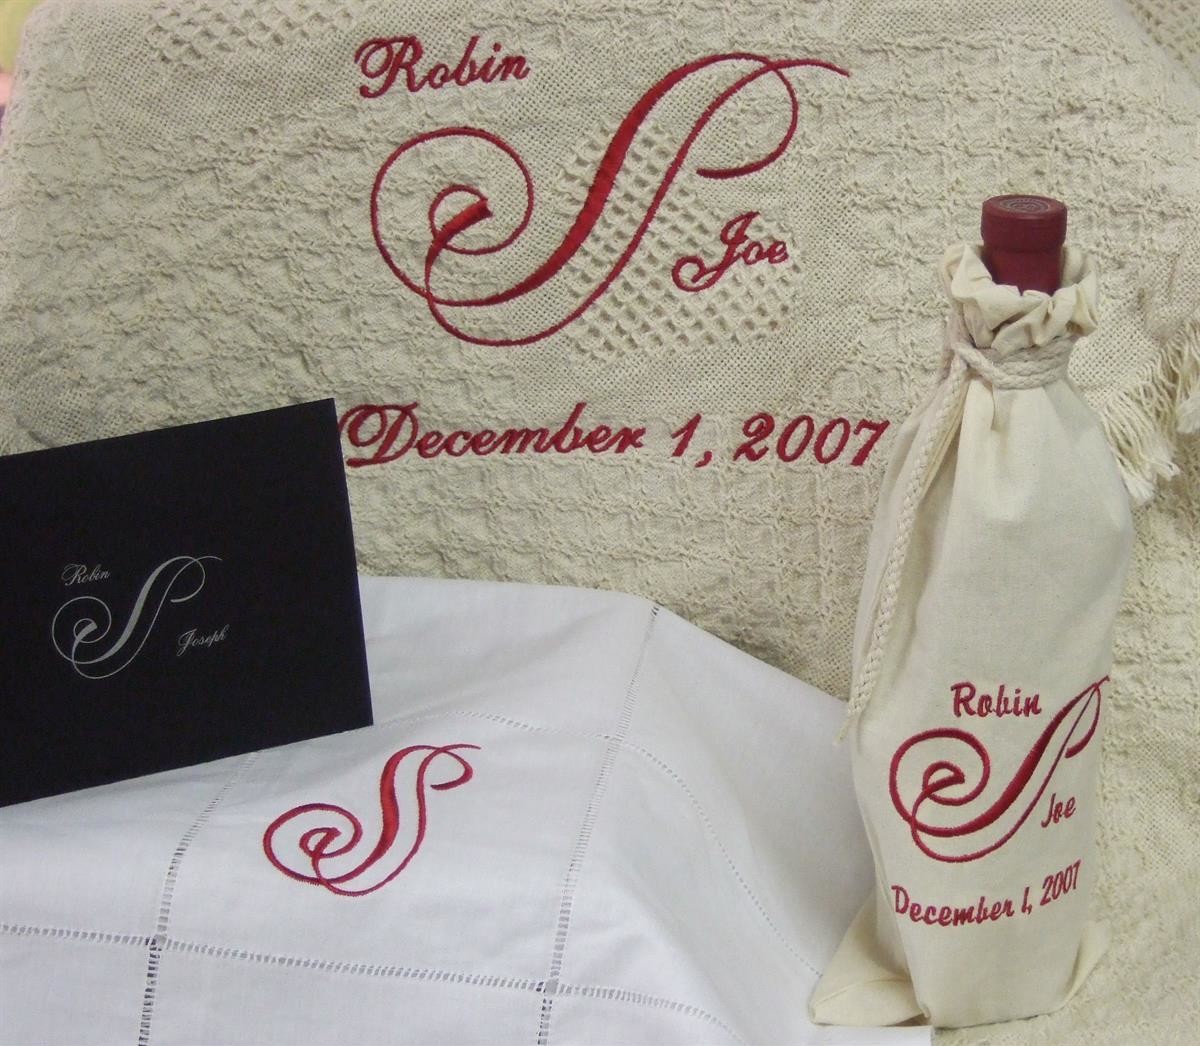 Wedding invitation in thread on table covering, wine bottle cover & blanket